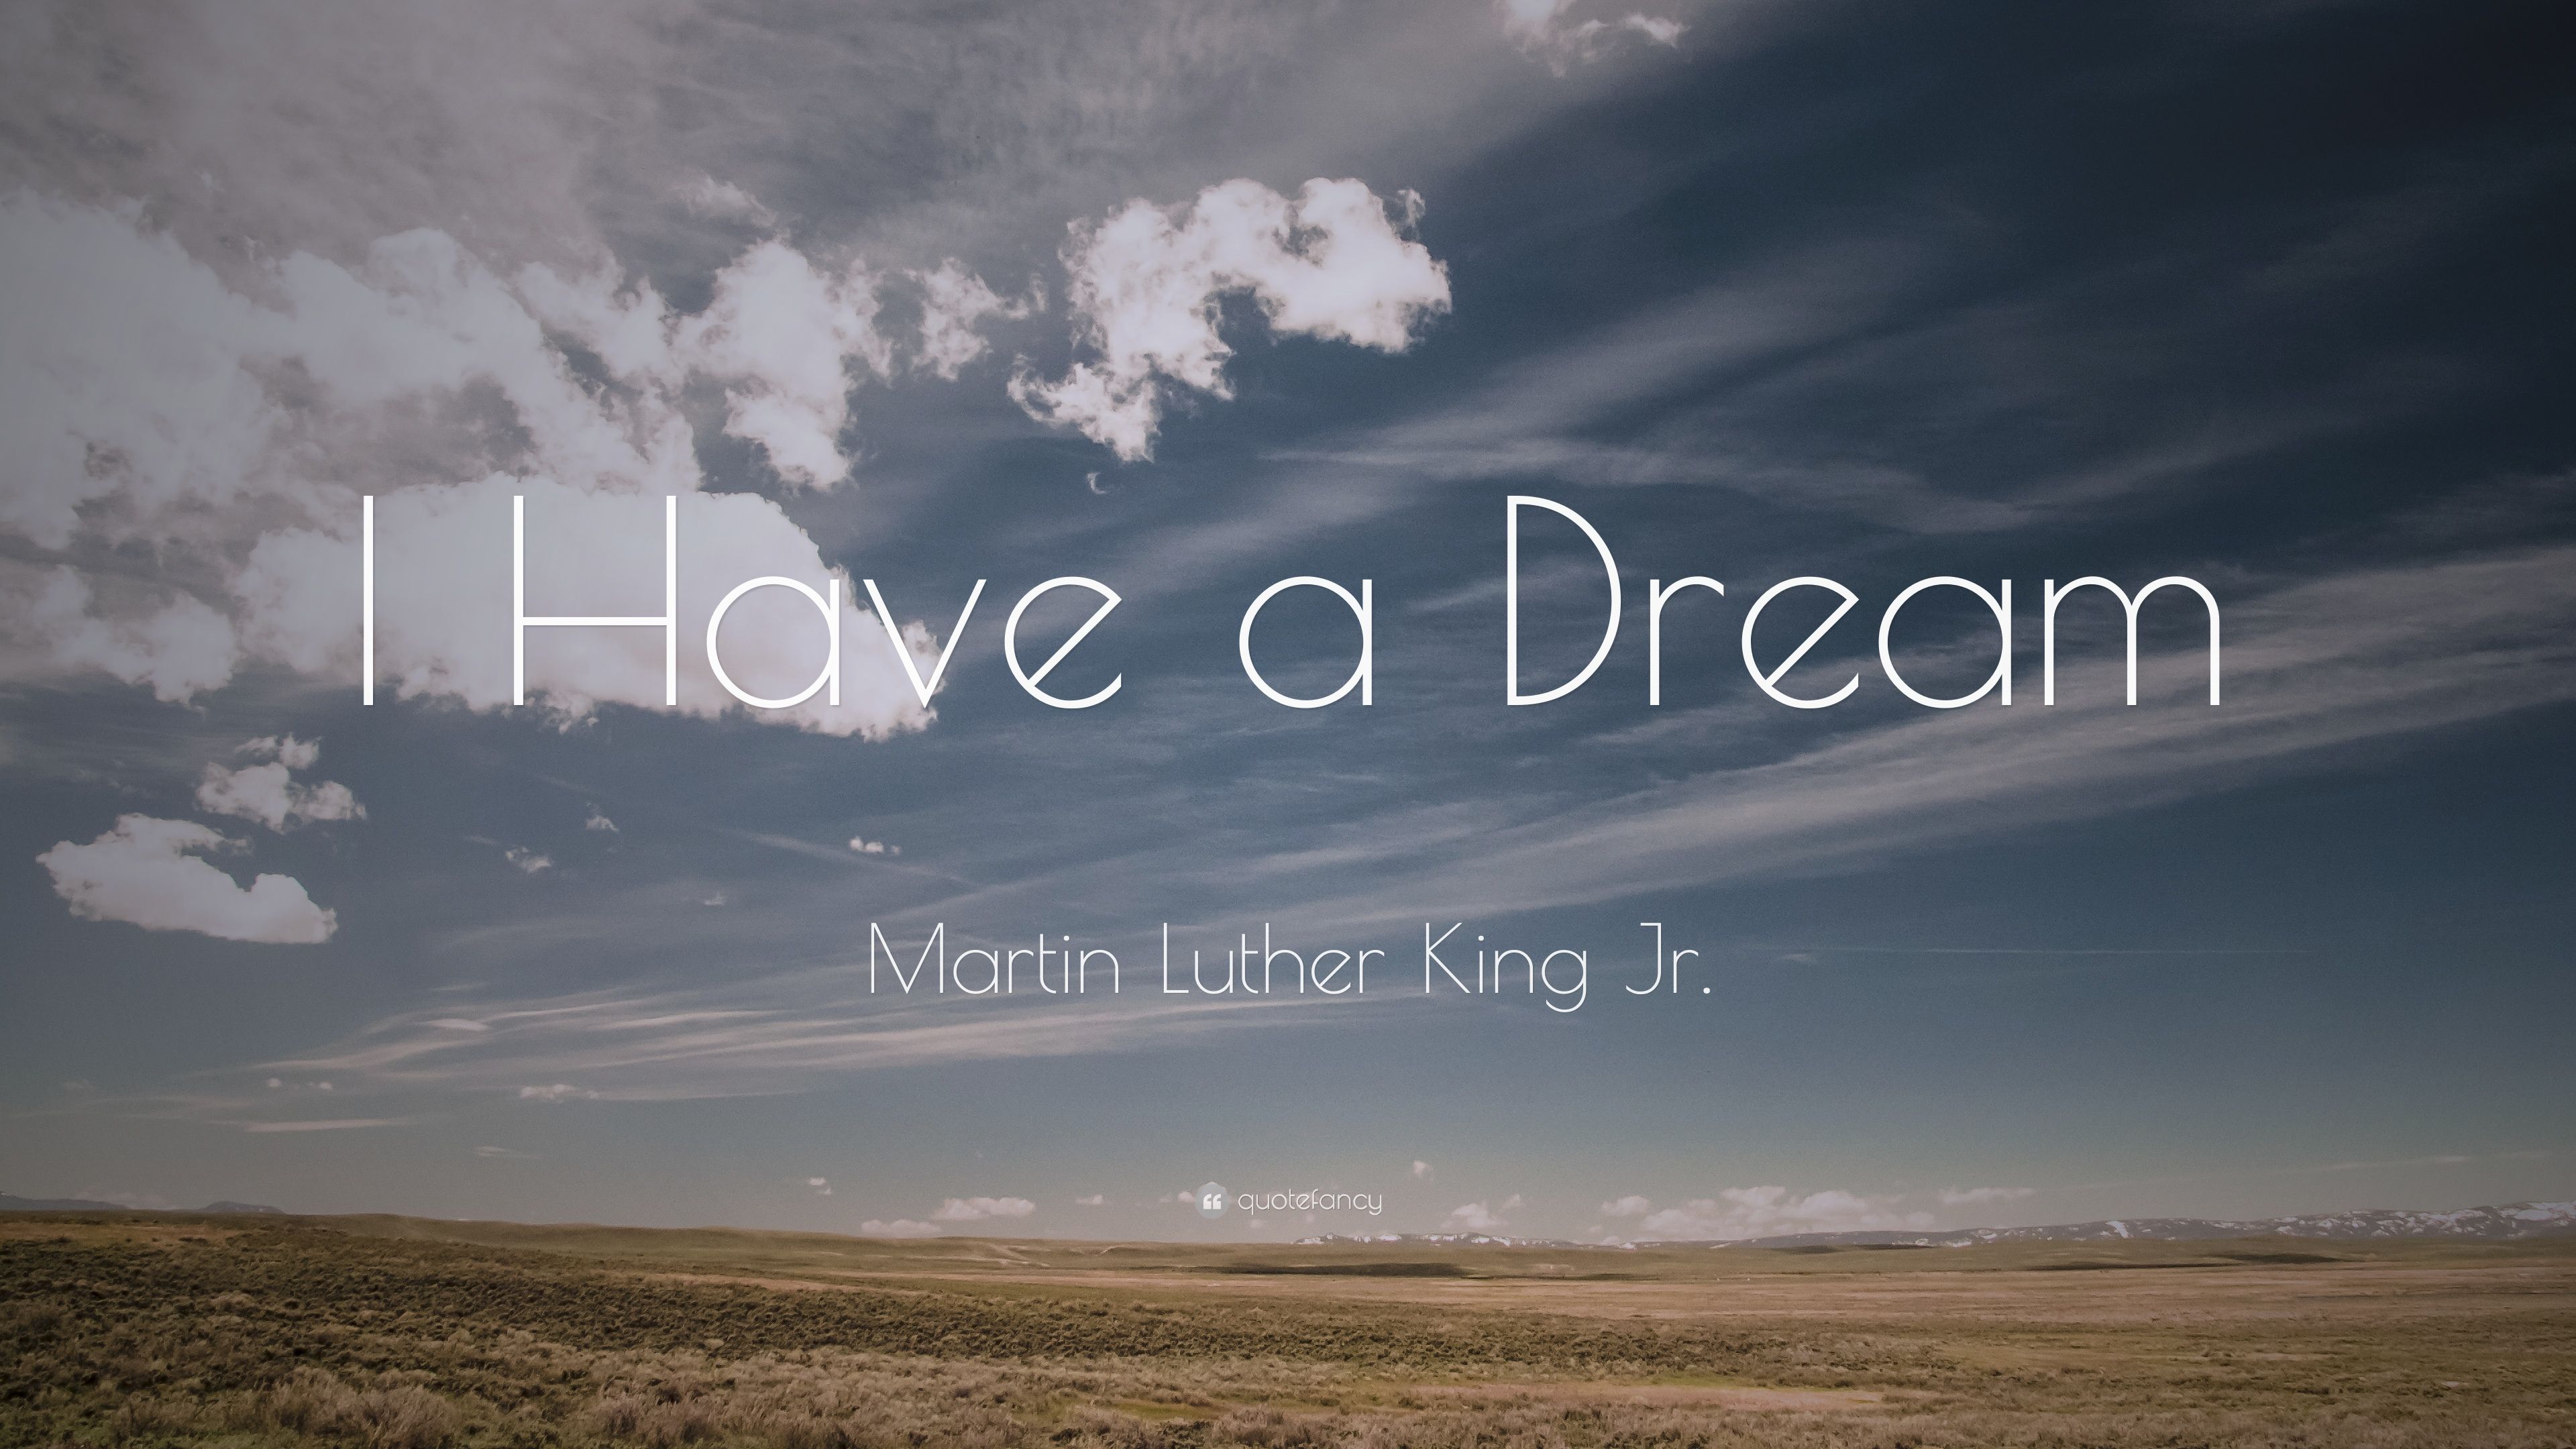 I Have a Dream Wallpaper Free I Have a Dream Background